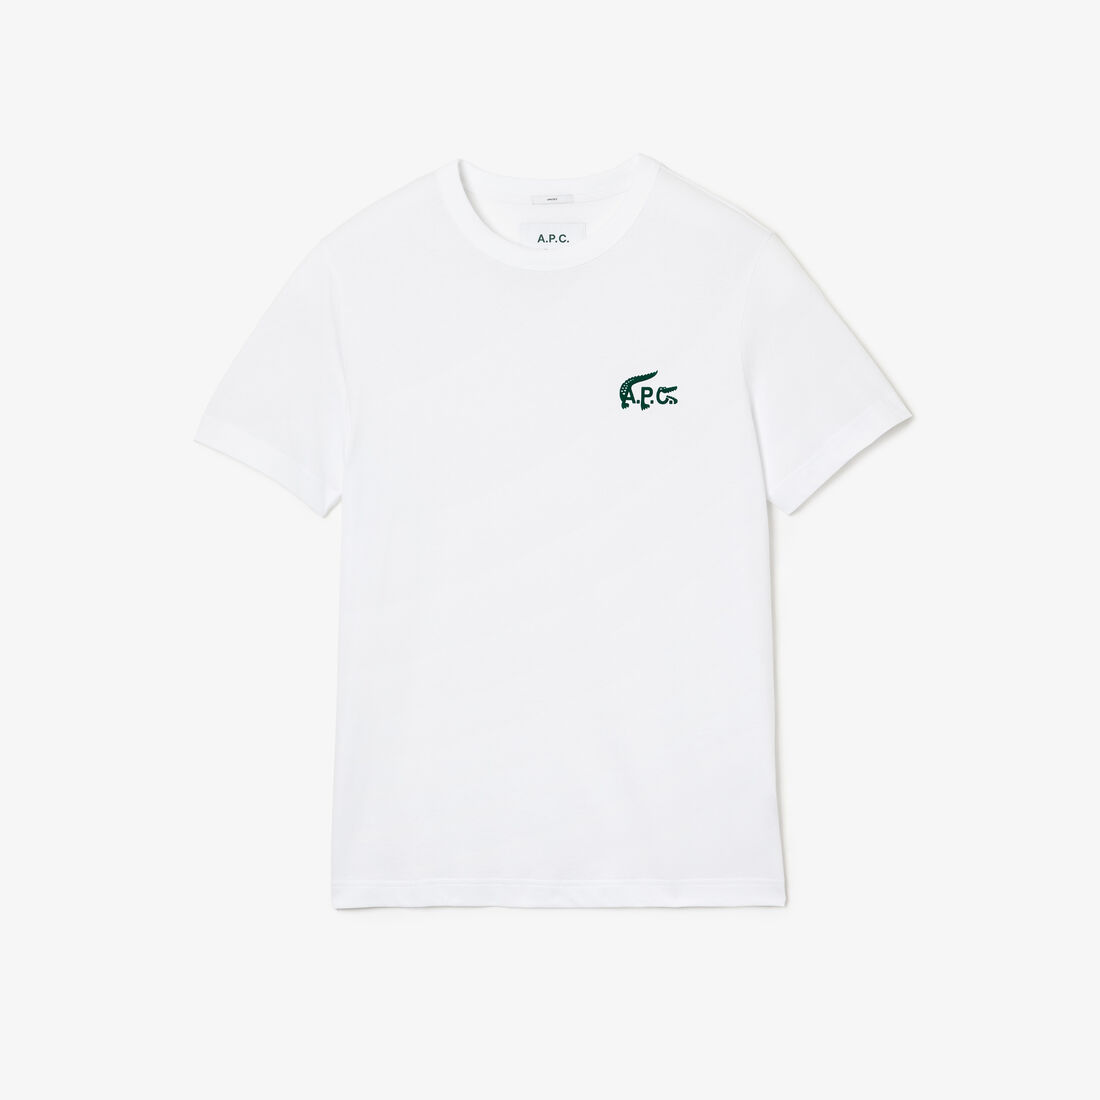 Unisex Lacoste A.P.C. Relaxed Fit Cotton Jersey T-shirt